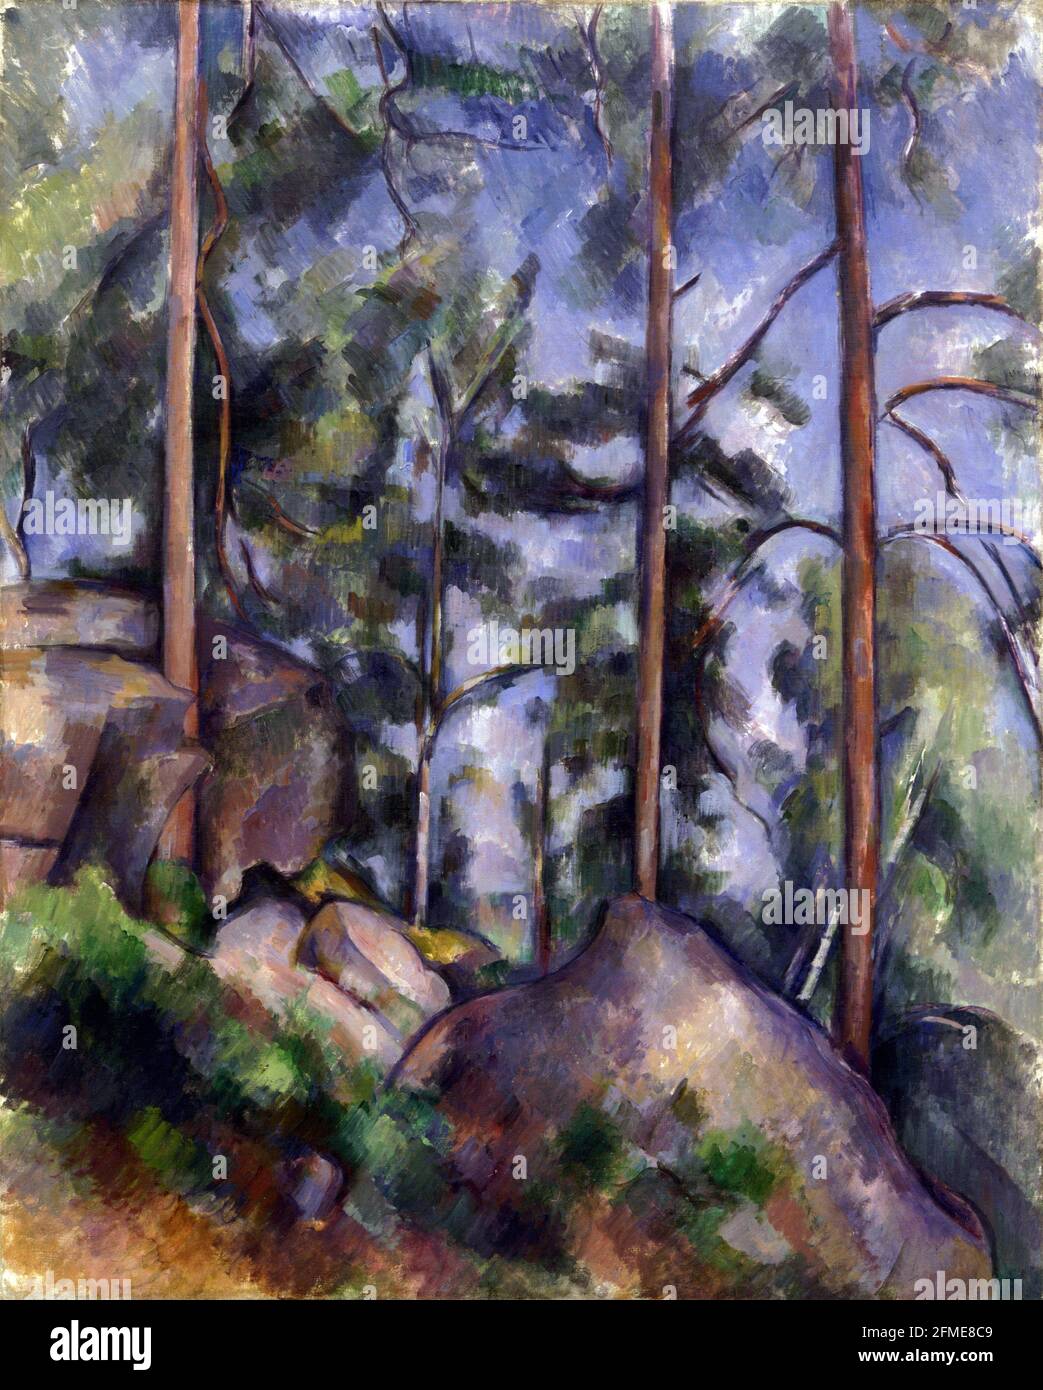 Paul Cézanne. (French, 1839-1906). Pines and Rocks (Fontainebleau?). c. 1897. Oil on canvas, 32 x 25 3/4' (81.3 x 65.4 cm). Stock Photo